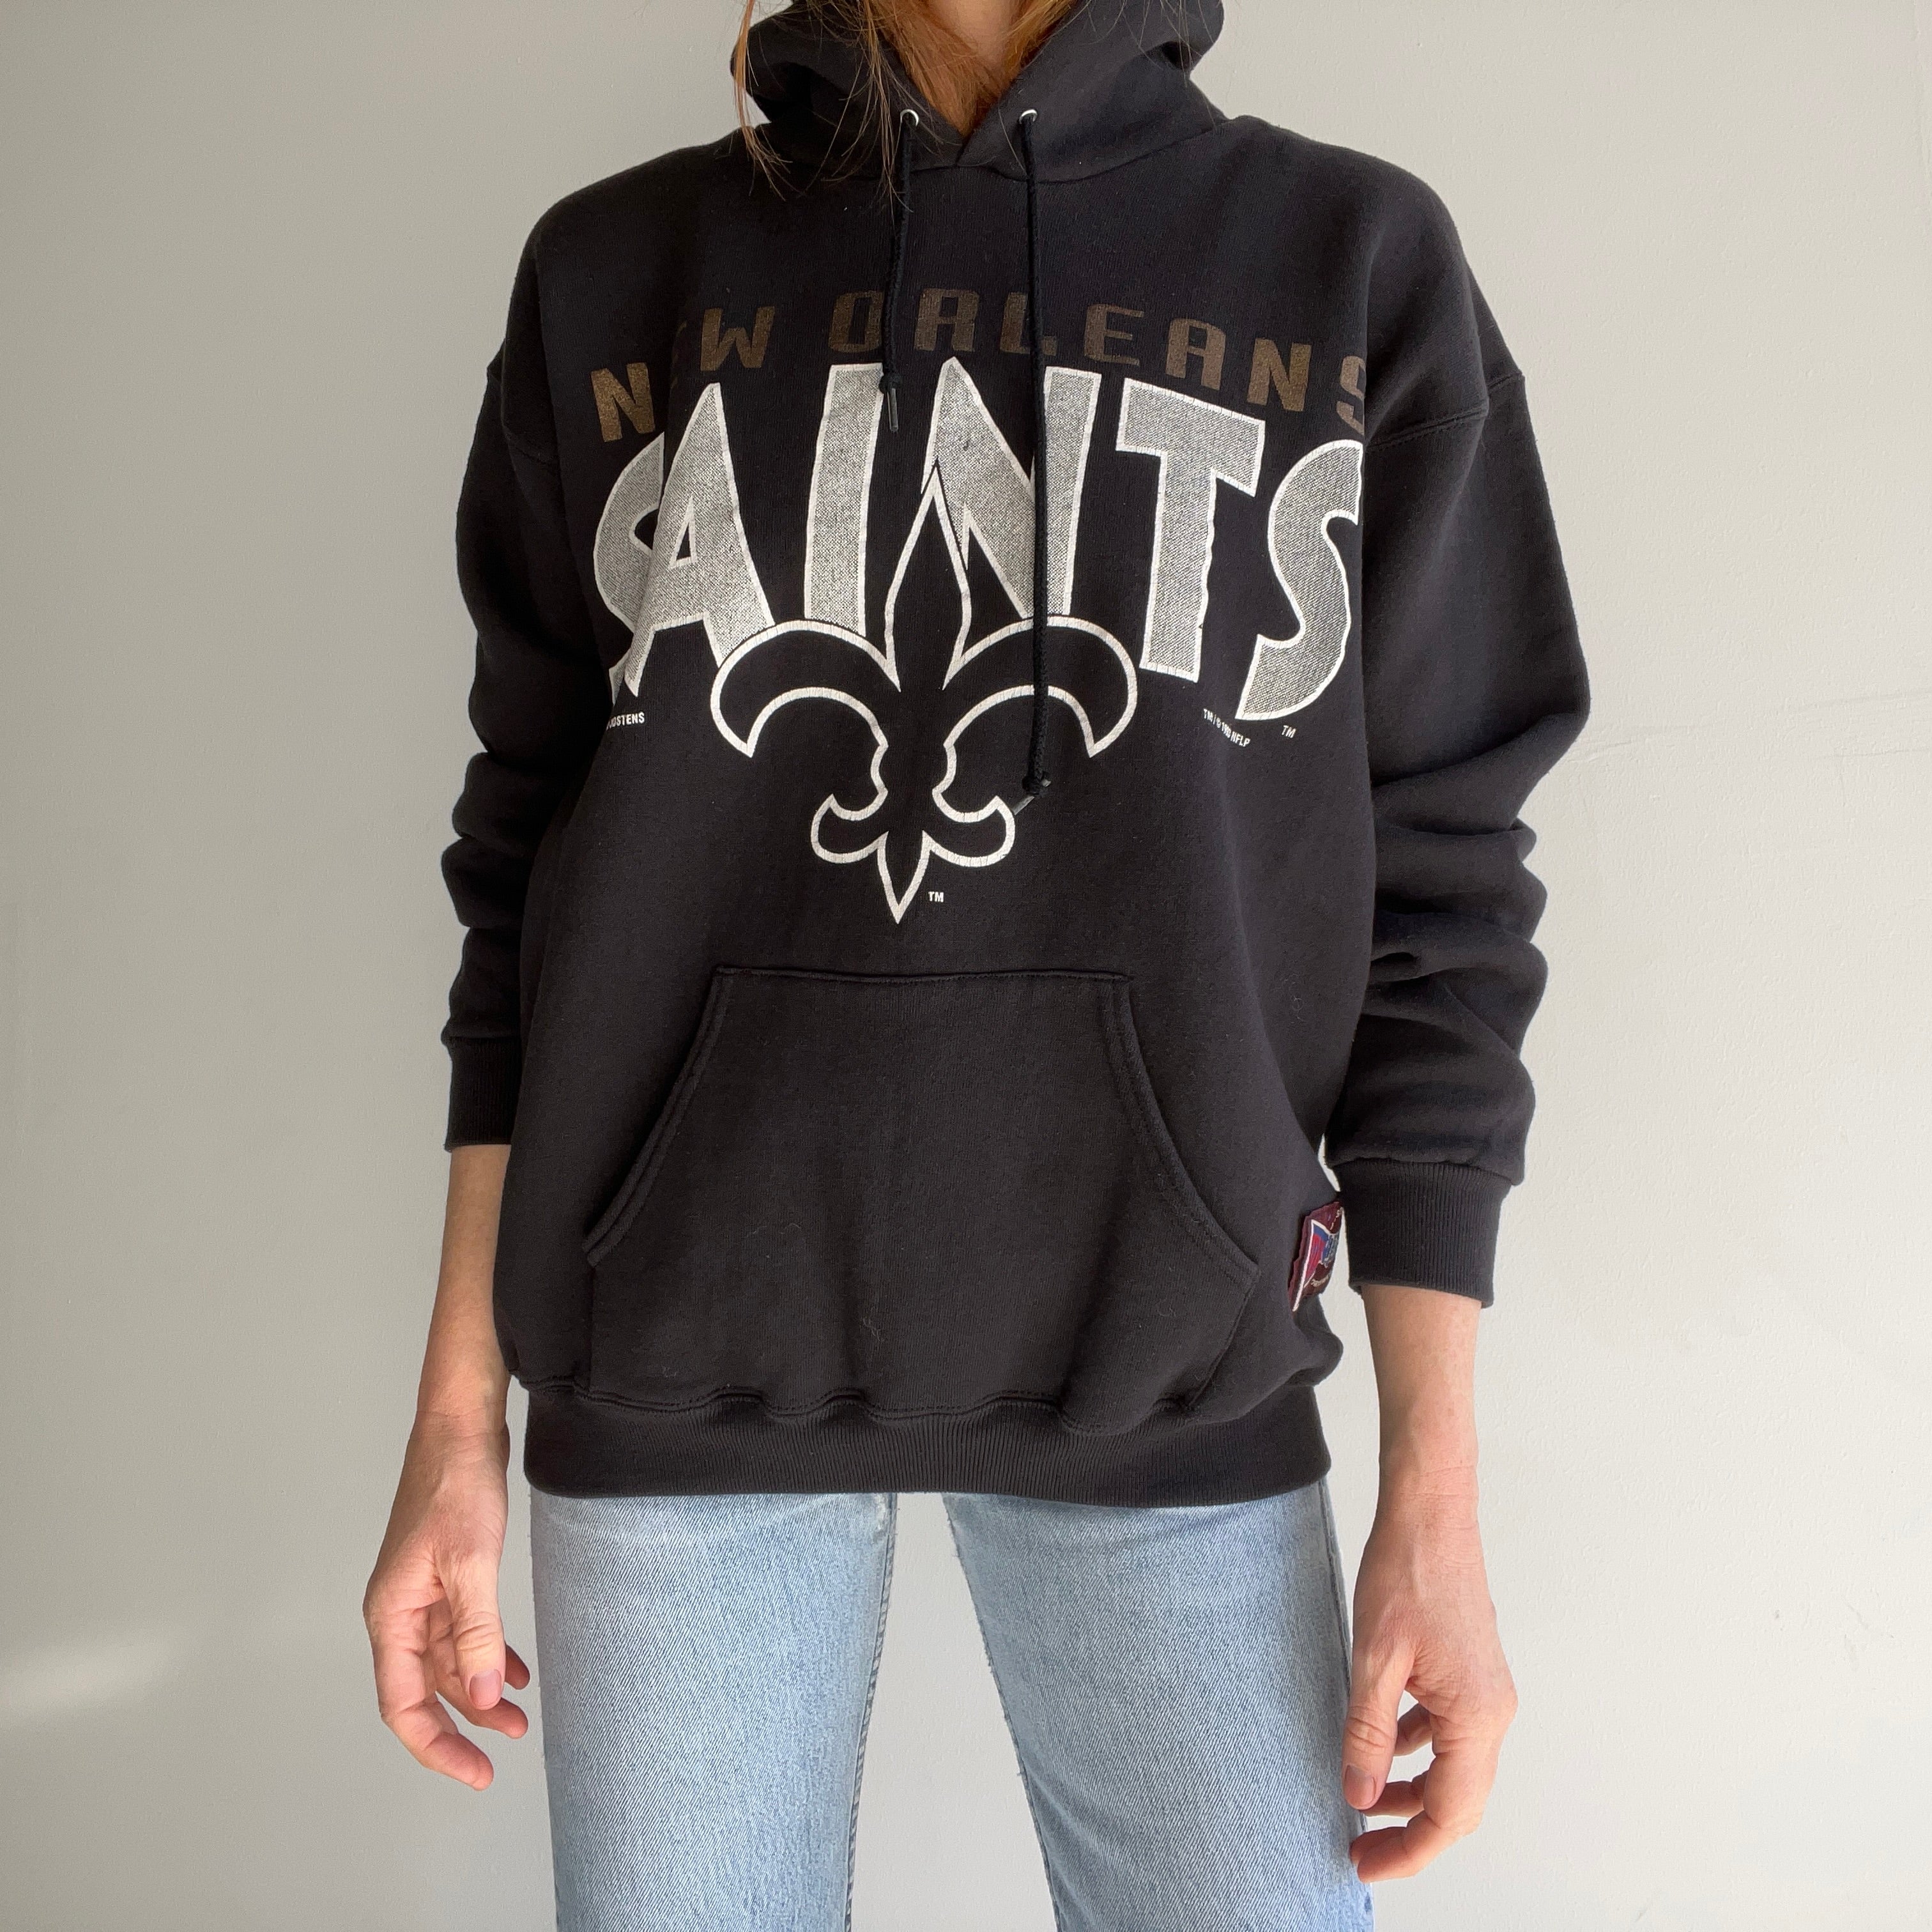 1993 New Orleans Saints Barely Worn Hoodie - WOW